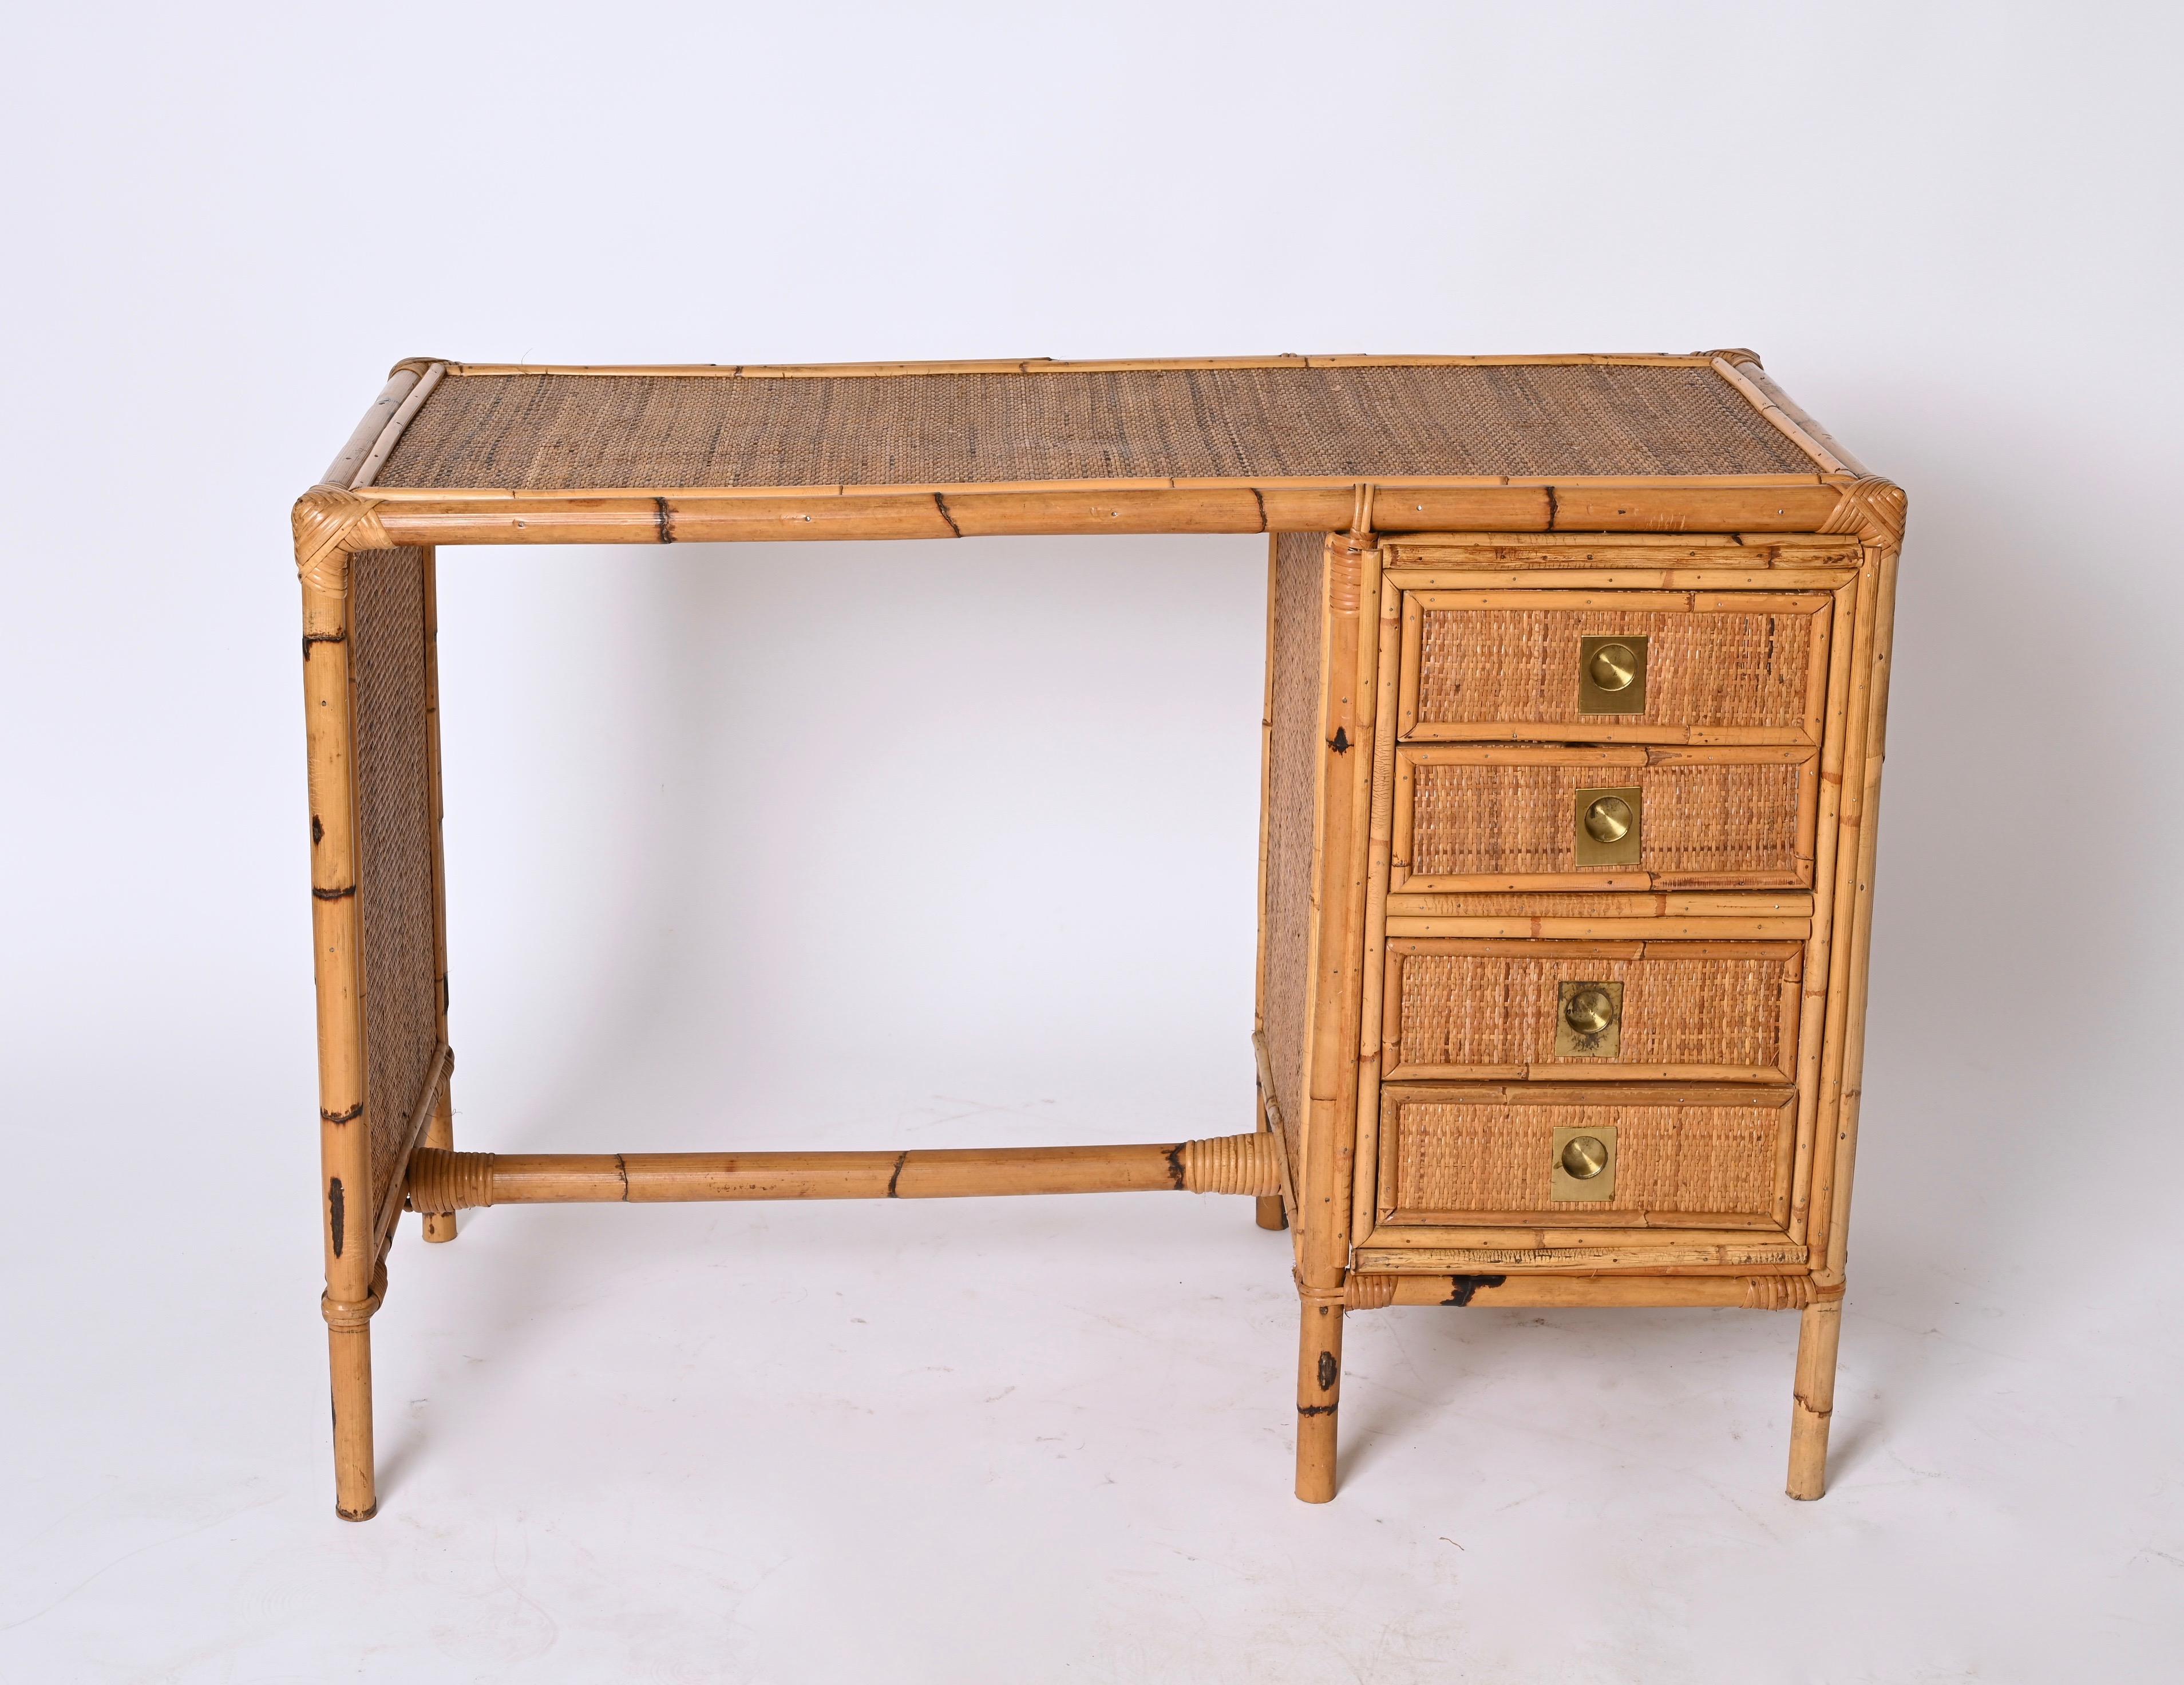 Wood Mid-Century Bamboo and Wicker Italian Desk with Drawers, Italy, 1980s